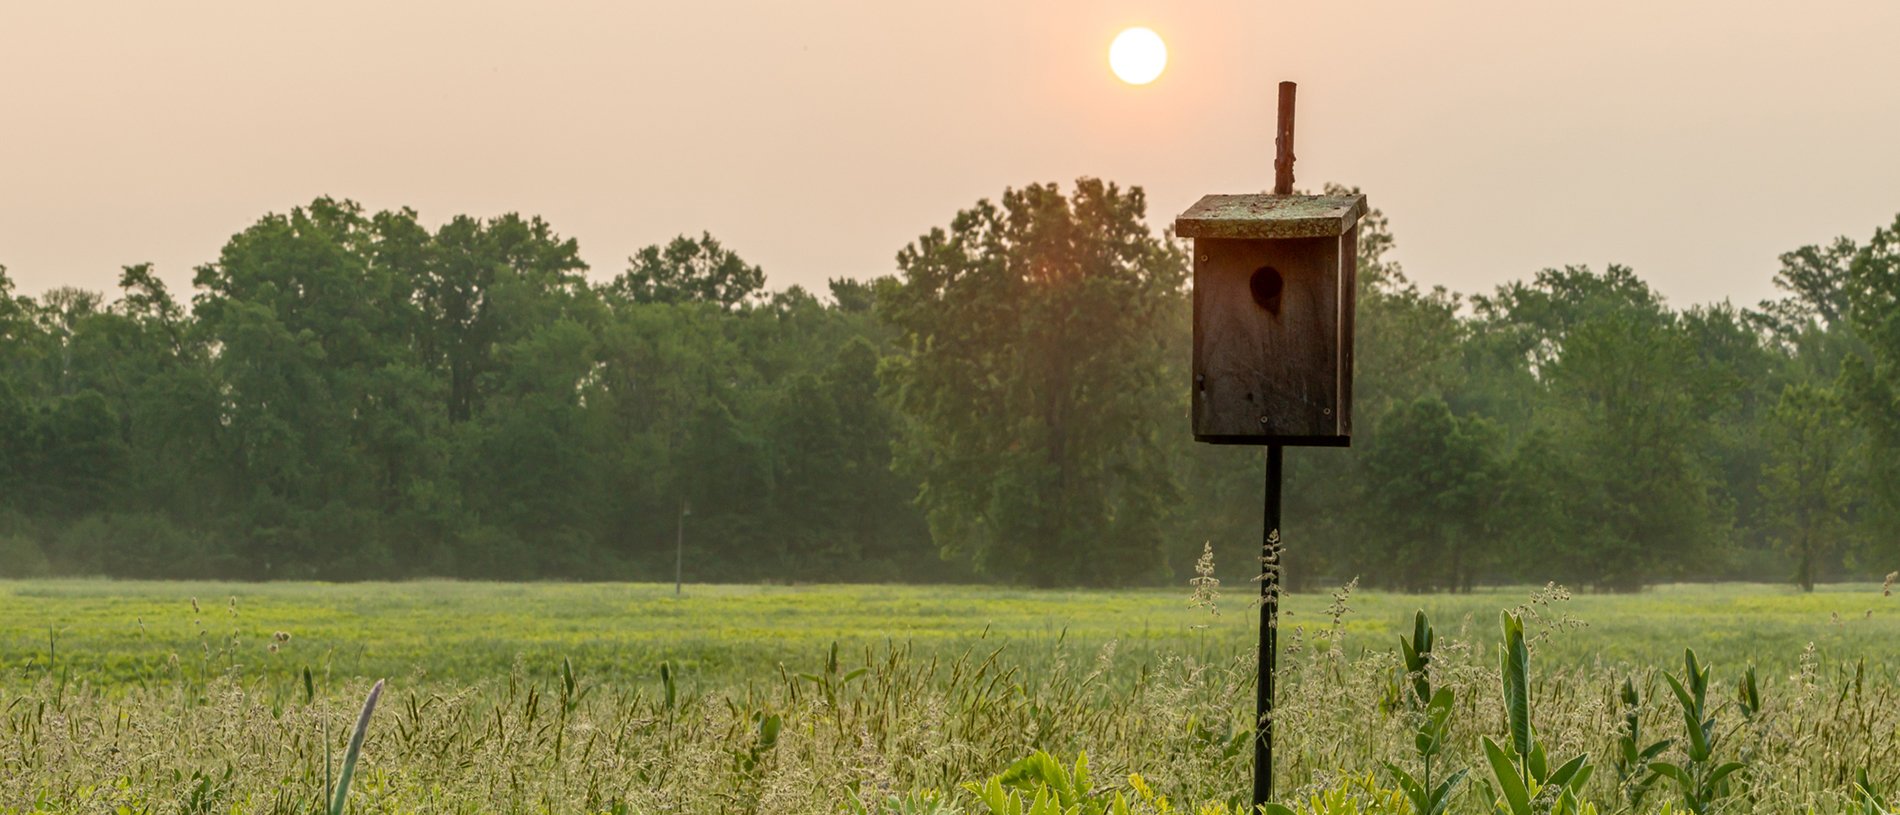 Meadow at sunset with Nest Box by Phil Doyle